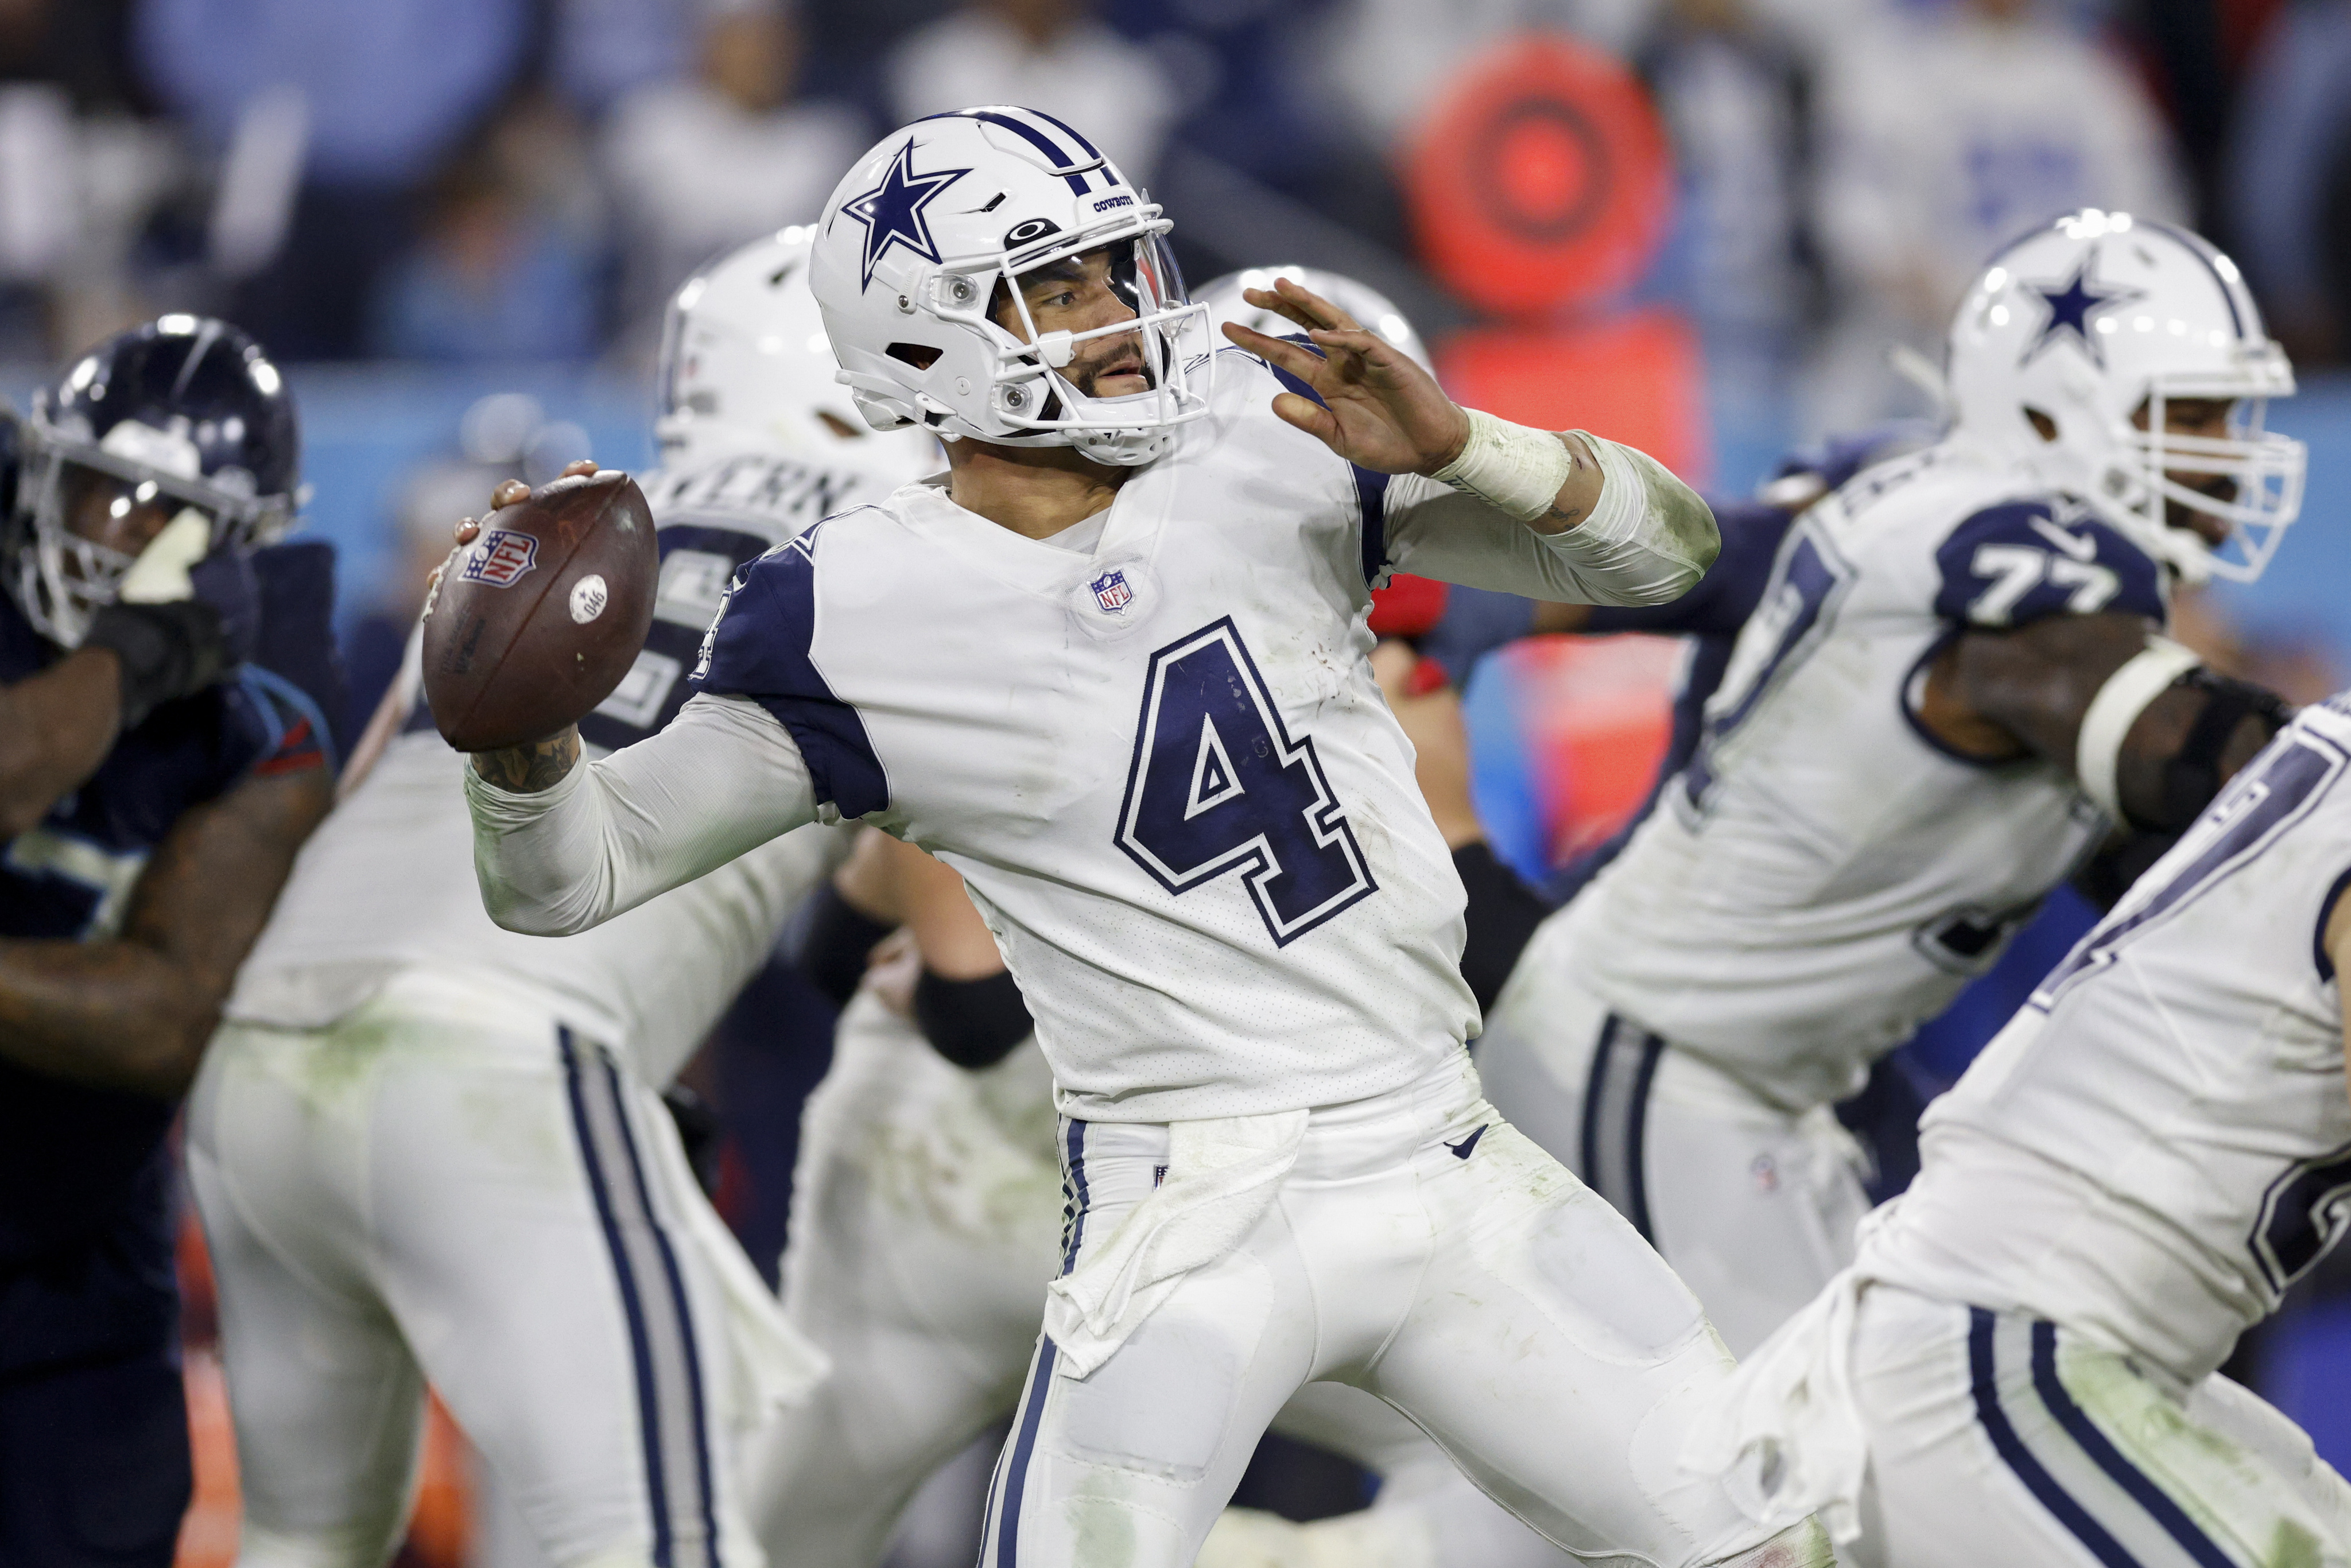 Dallas Cowboys bring back Double-Star look with Color Rush